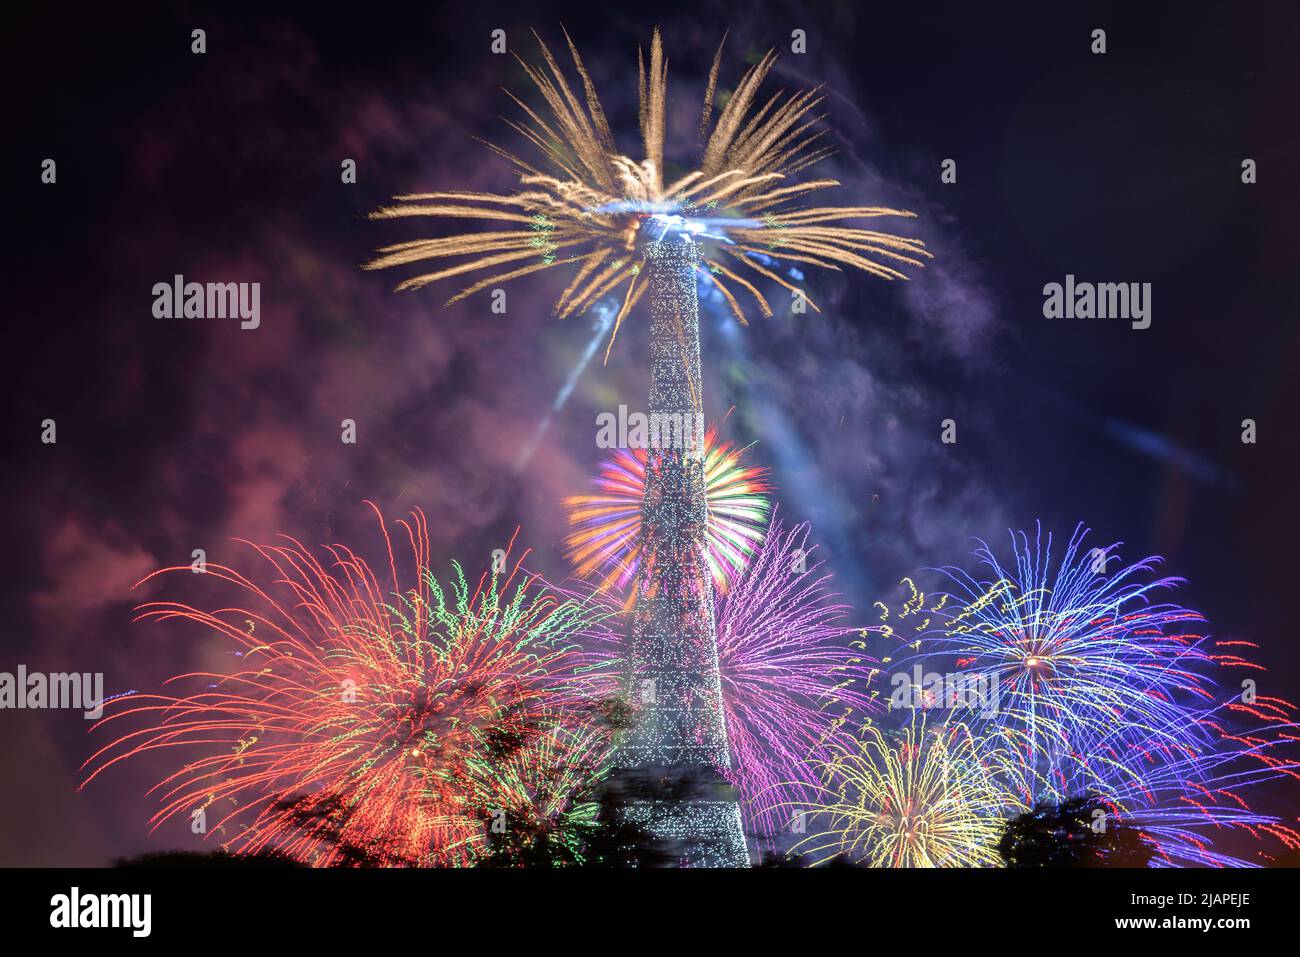 Fireworks at the Eiffel Tower, photographed from a vantage point in front of the ƒcole Militaire. Paris fireworks, France. Editorial use only Stock Photo